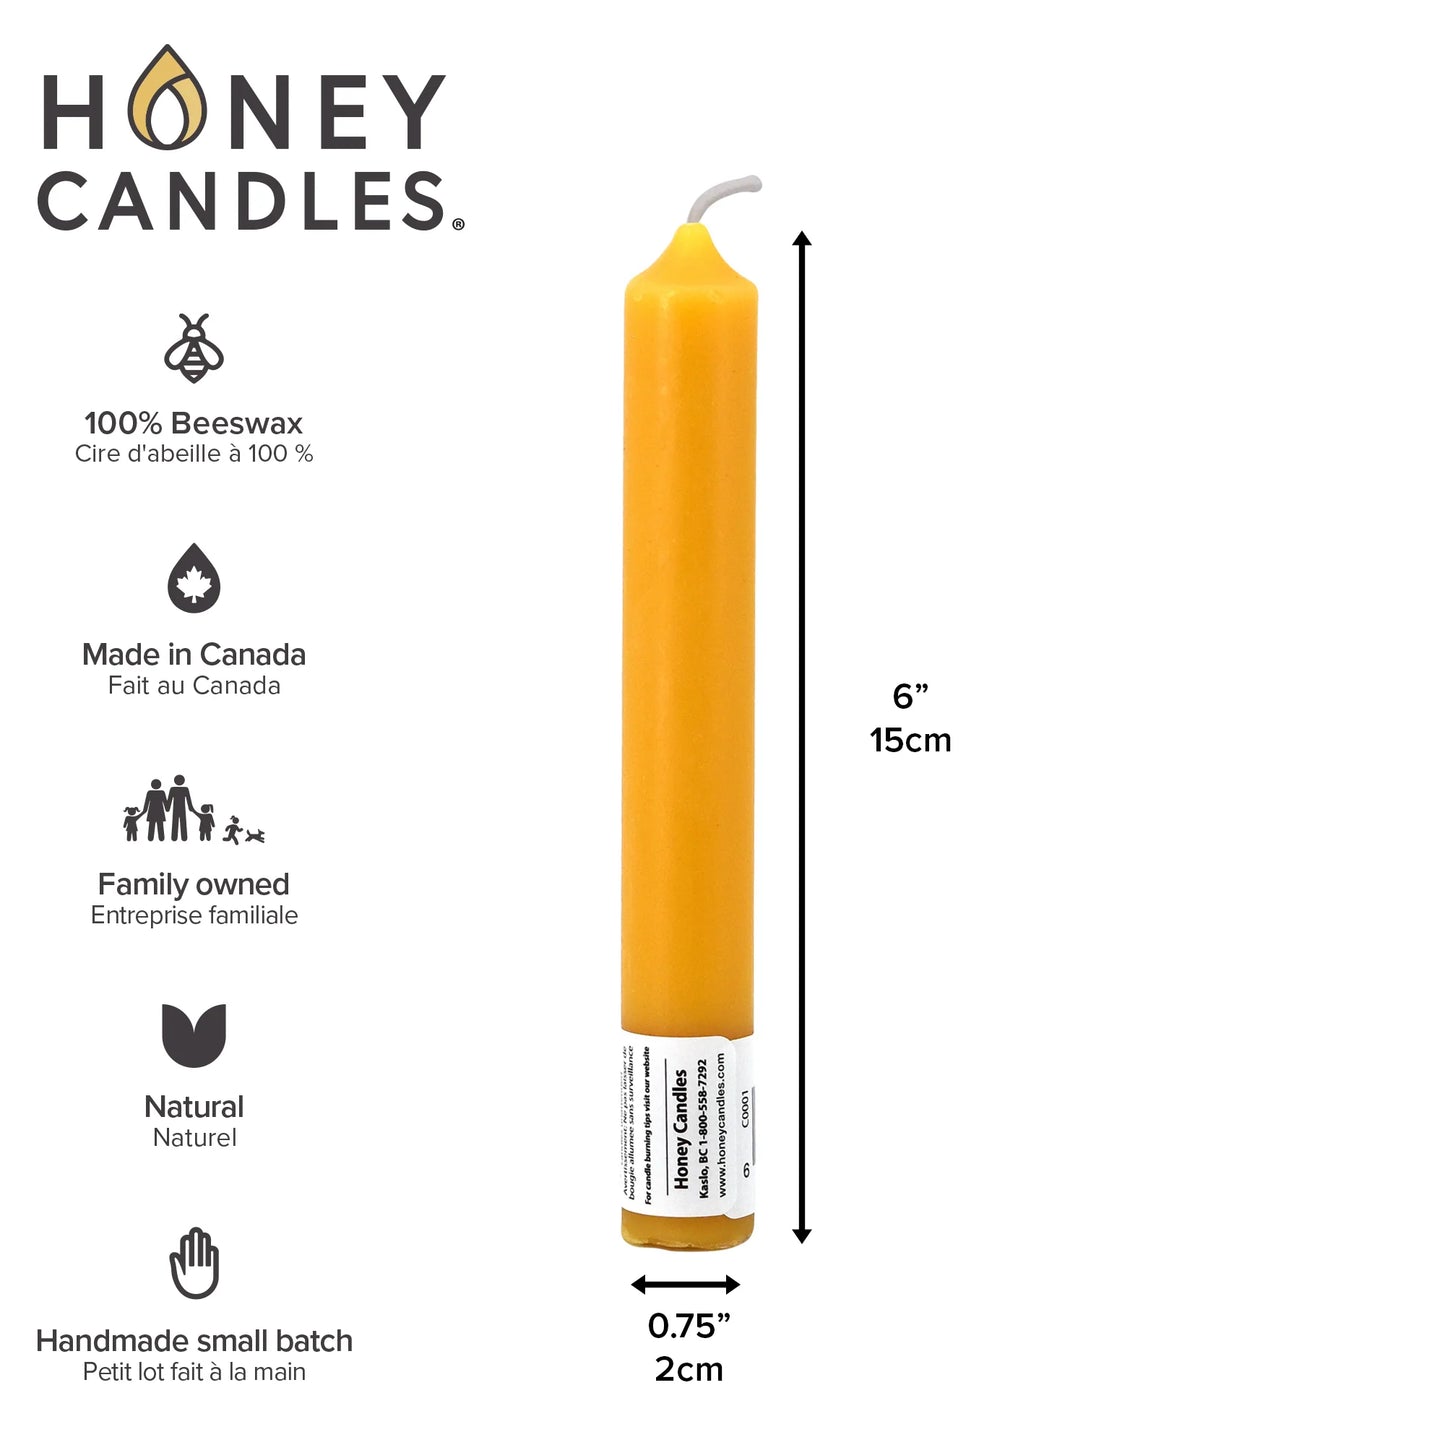 Honey Candles Beeswax 6" Tube Candle